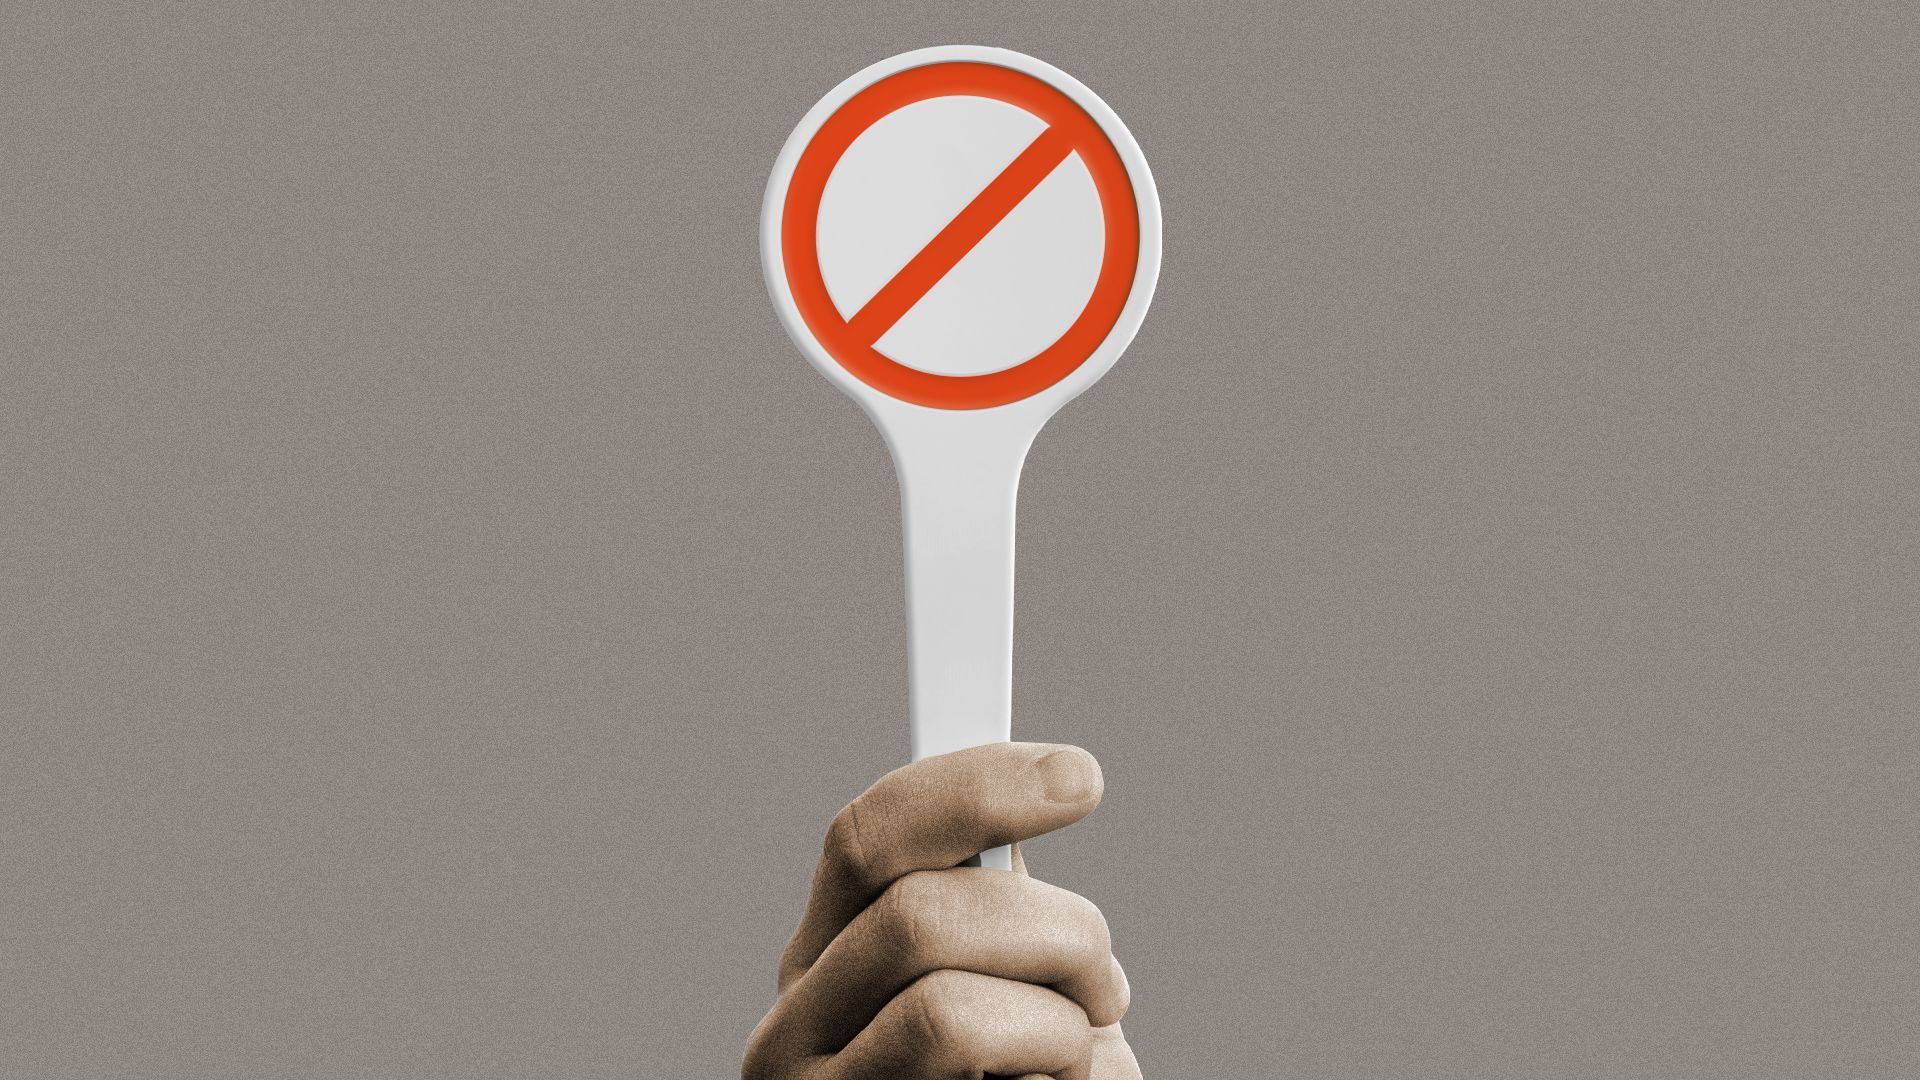 Illustration of a hand holding an auction paddle with a "no" symbol.